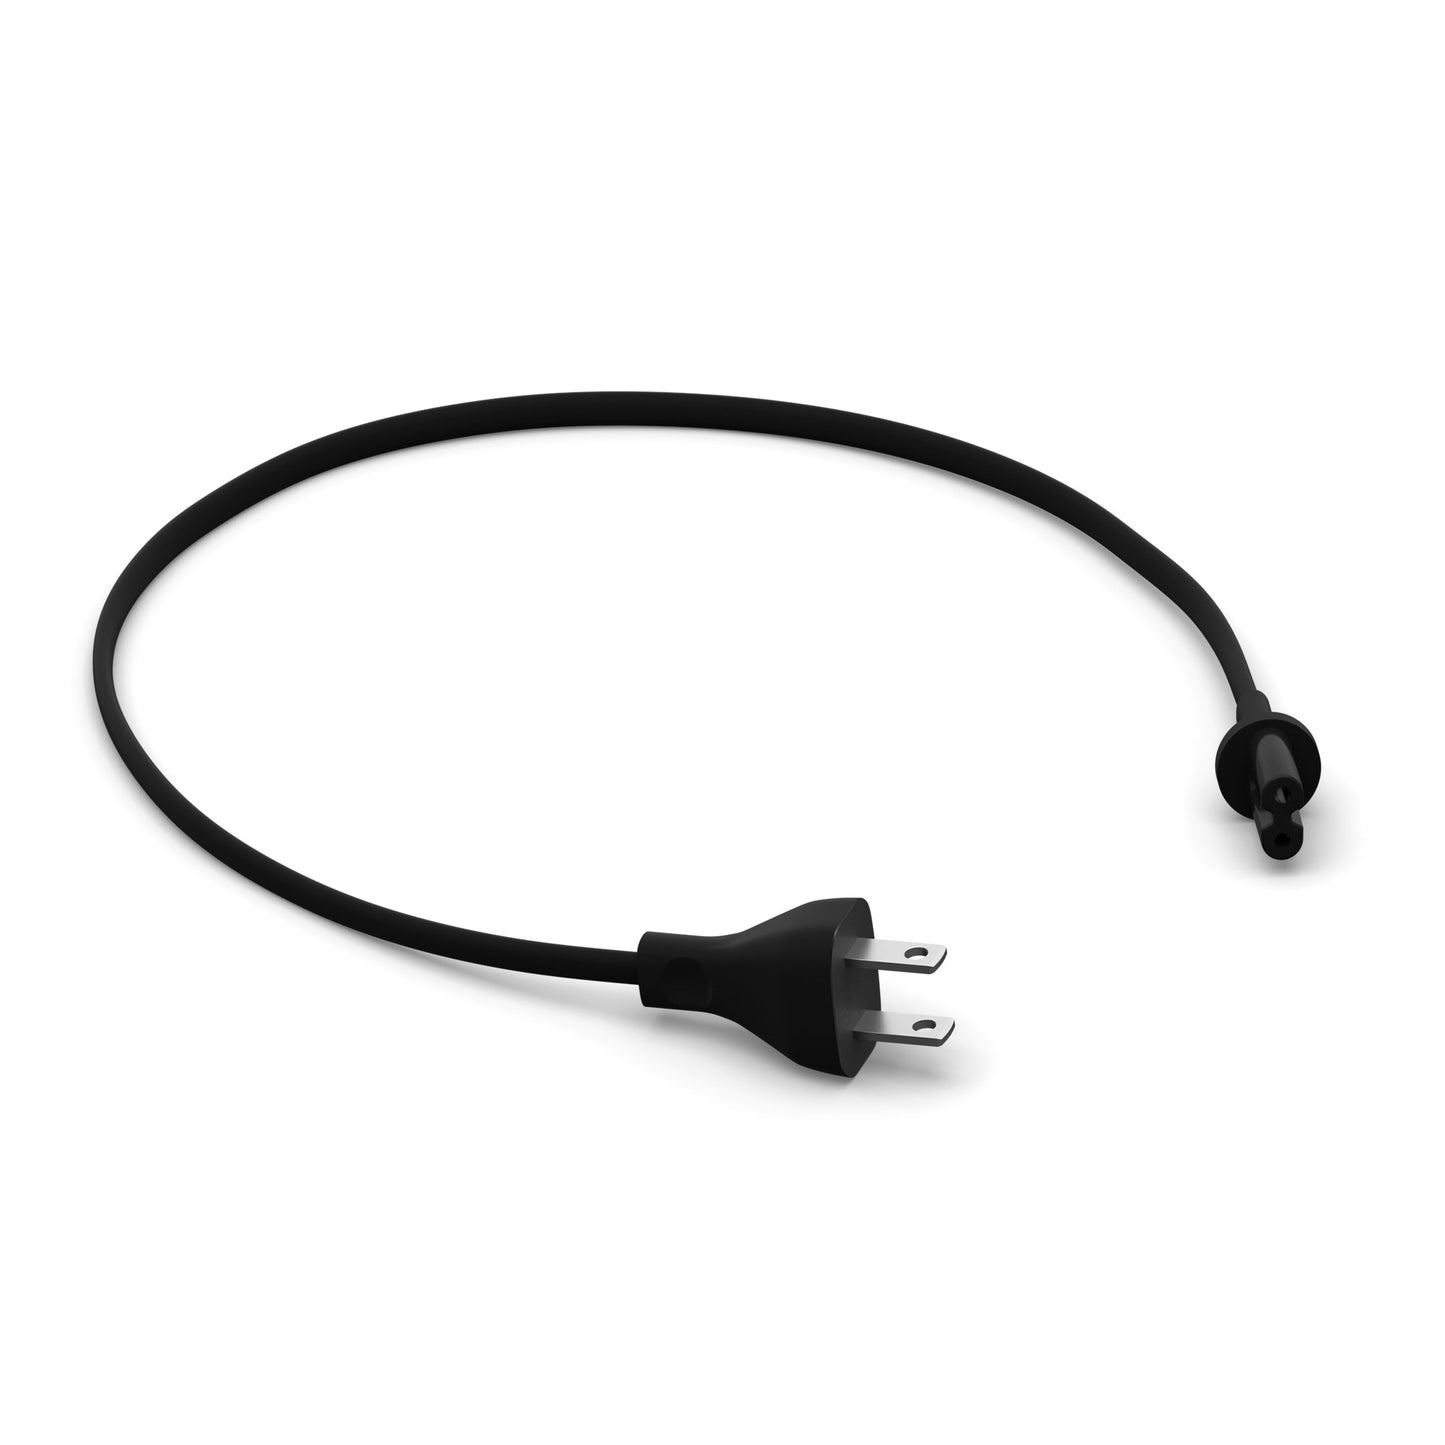 Sonos Power Cable 19.7in (Black) - Top View